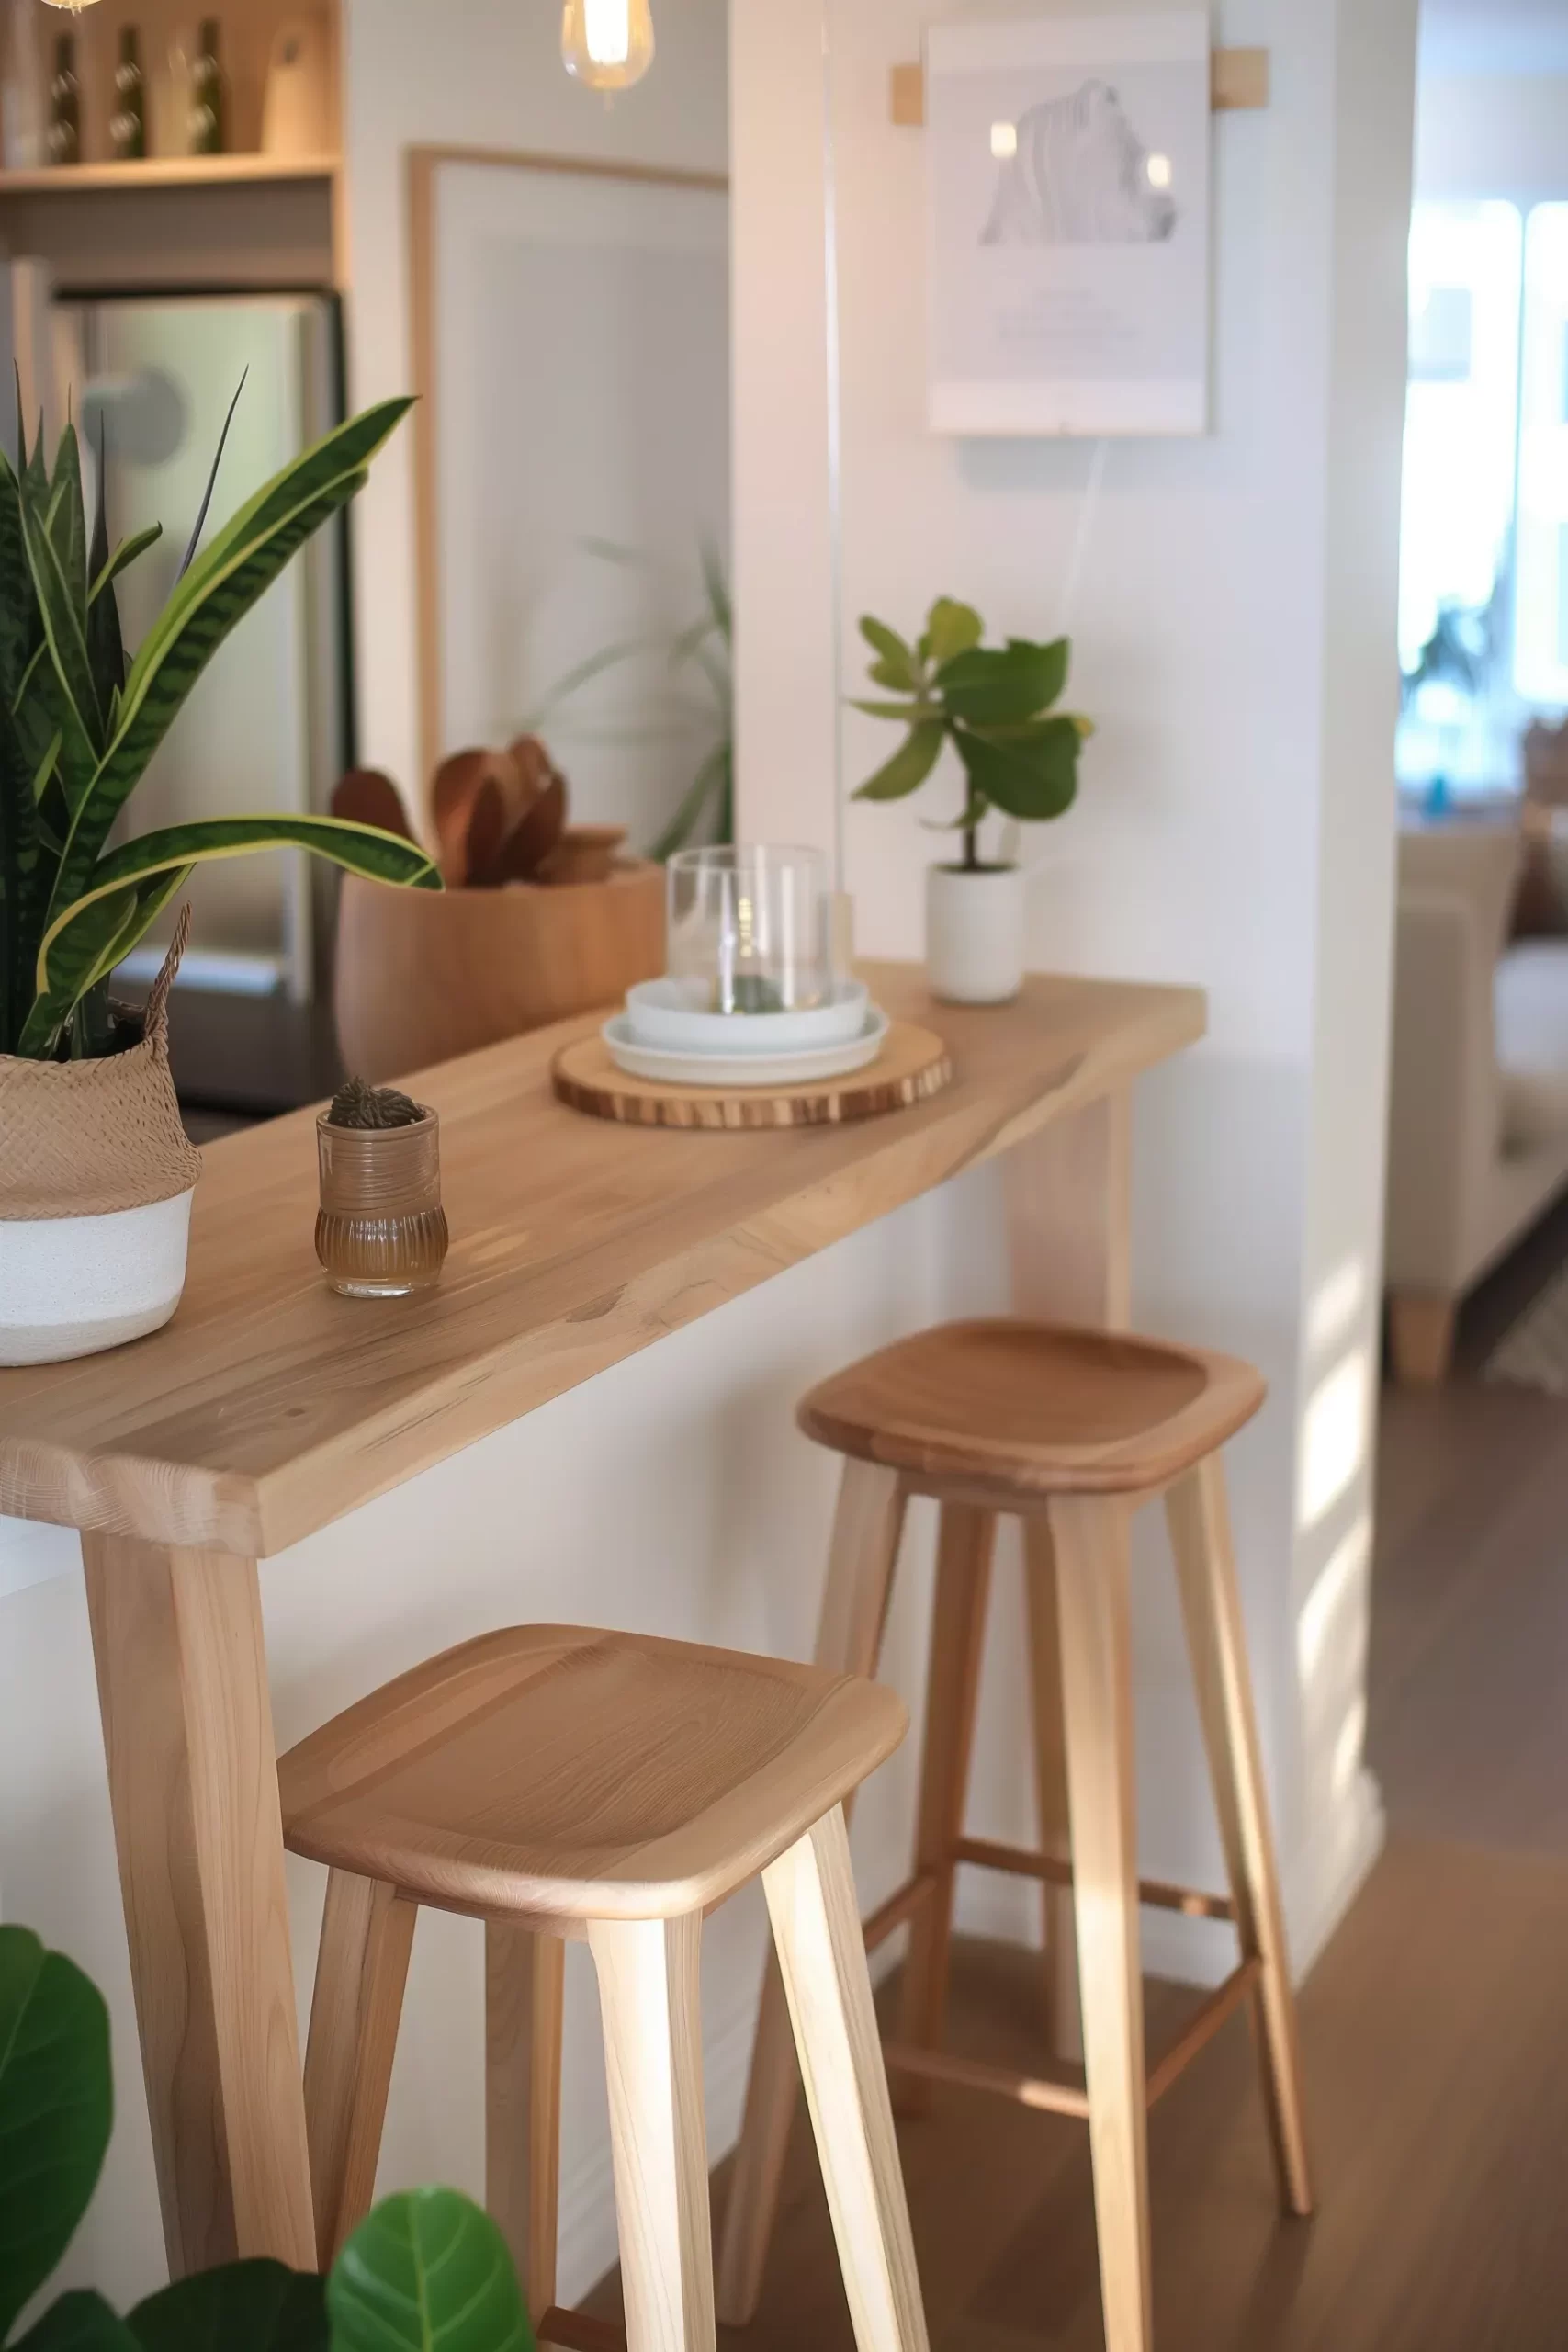 Upgrade Your Morning Routine with a Stylish Breakfast Bar Table and Stools